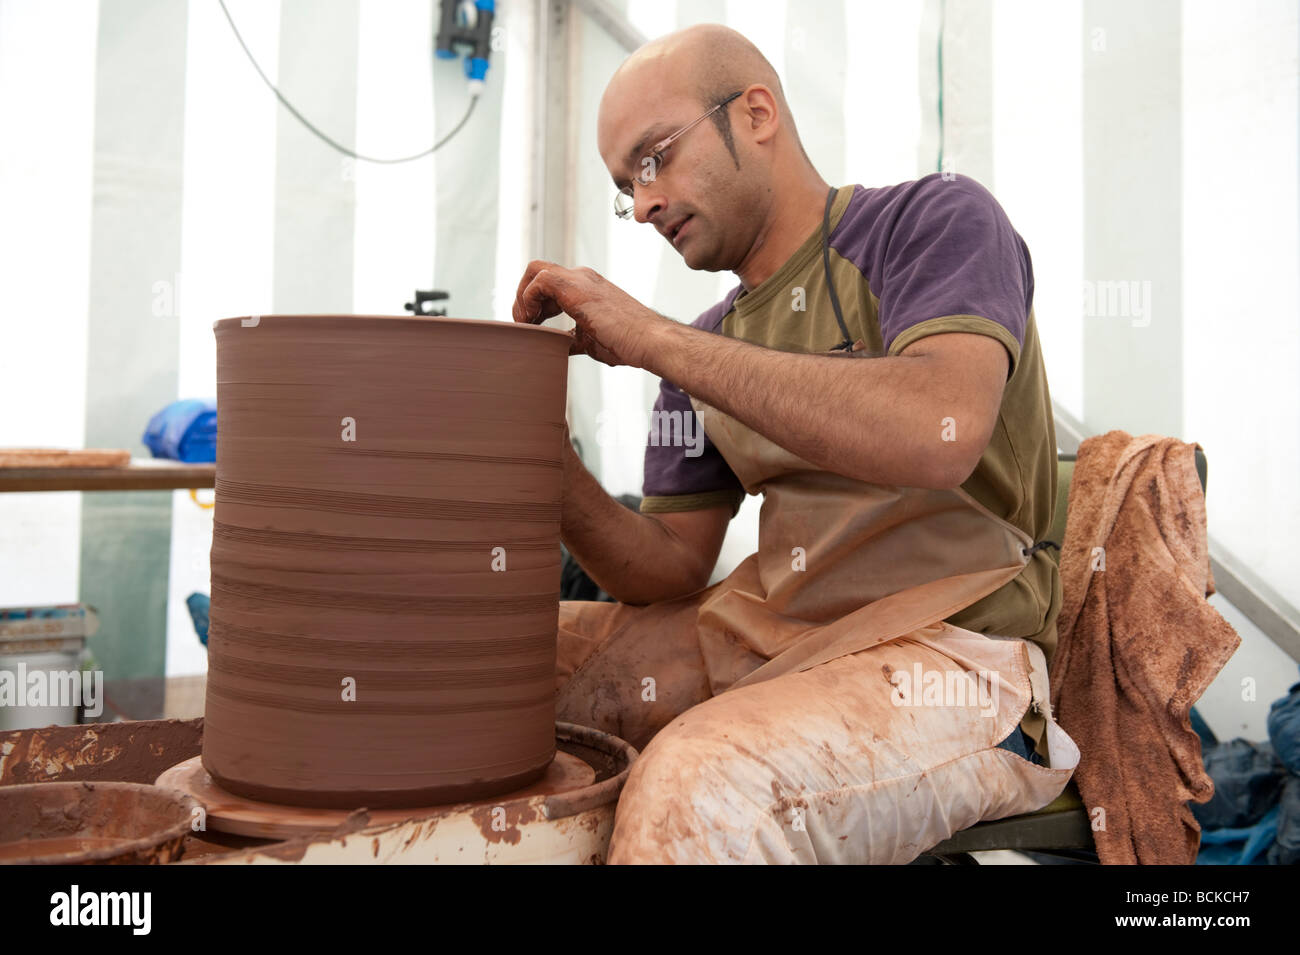 SERGE SANGHERA potter throwing a clay pot on a wheel at the International Ceramics Festival 2009 Aberystwyth Wales UK Stock Photo